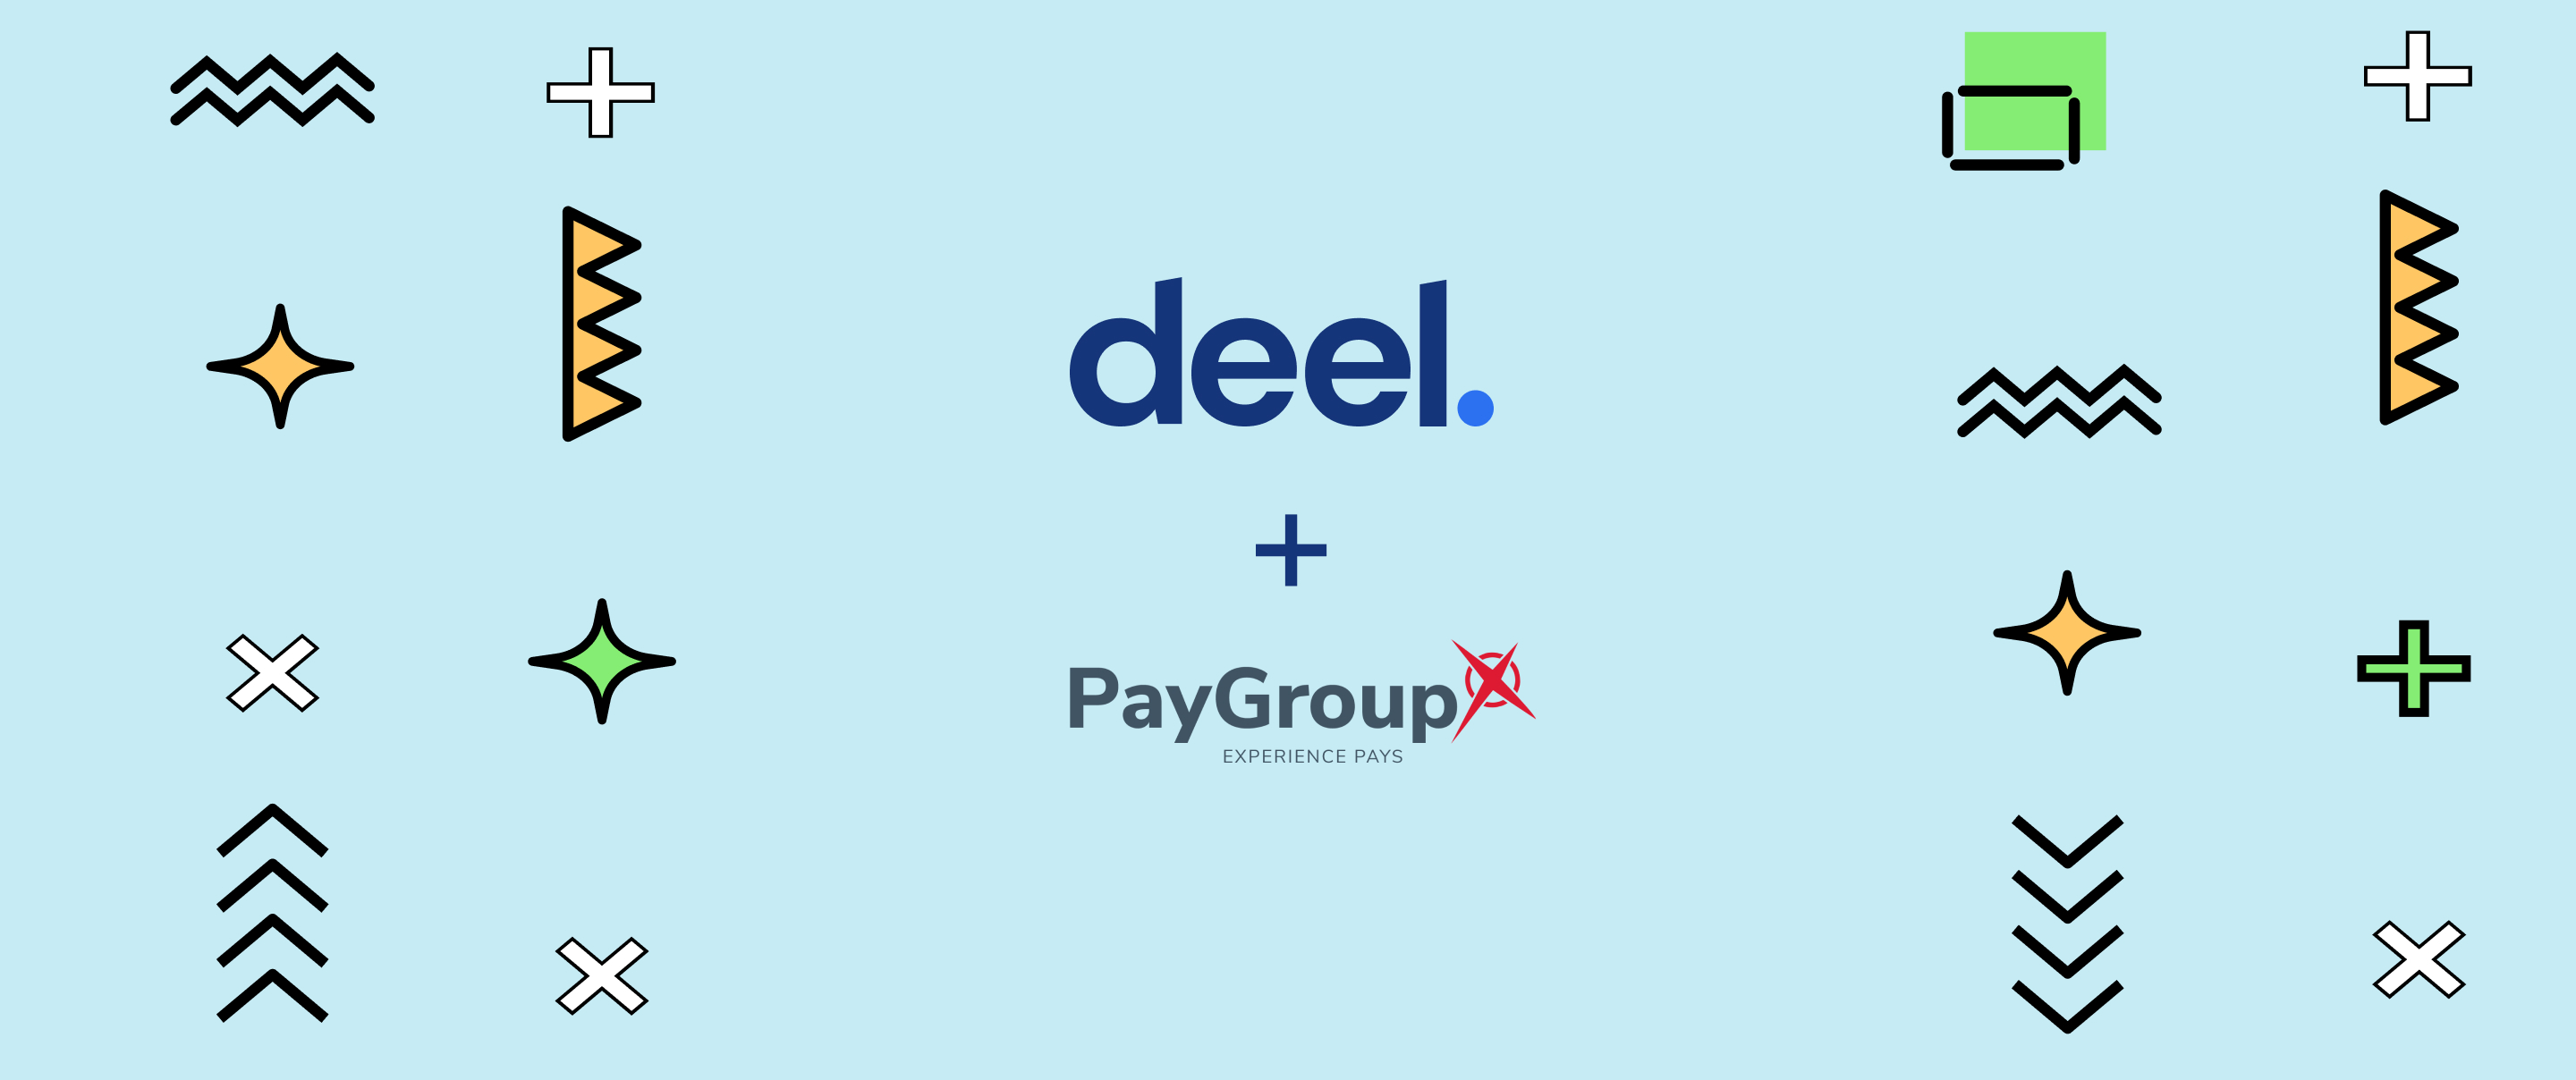 Deel enters public offer to acquire PayGroup Limited